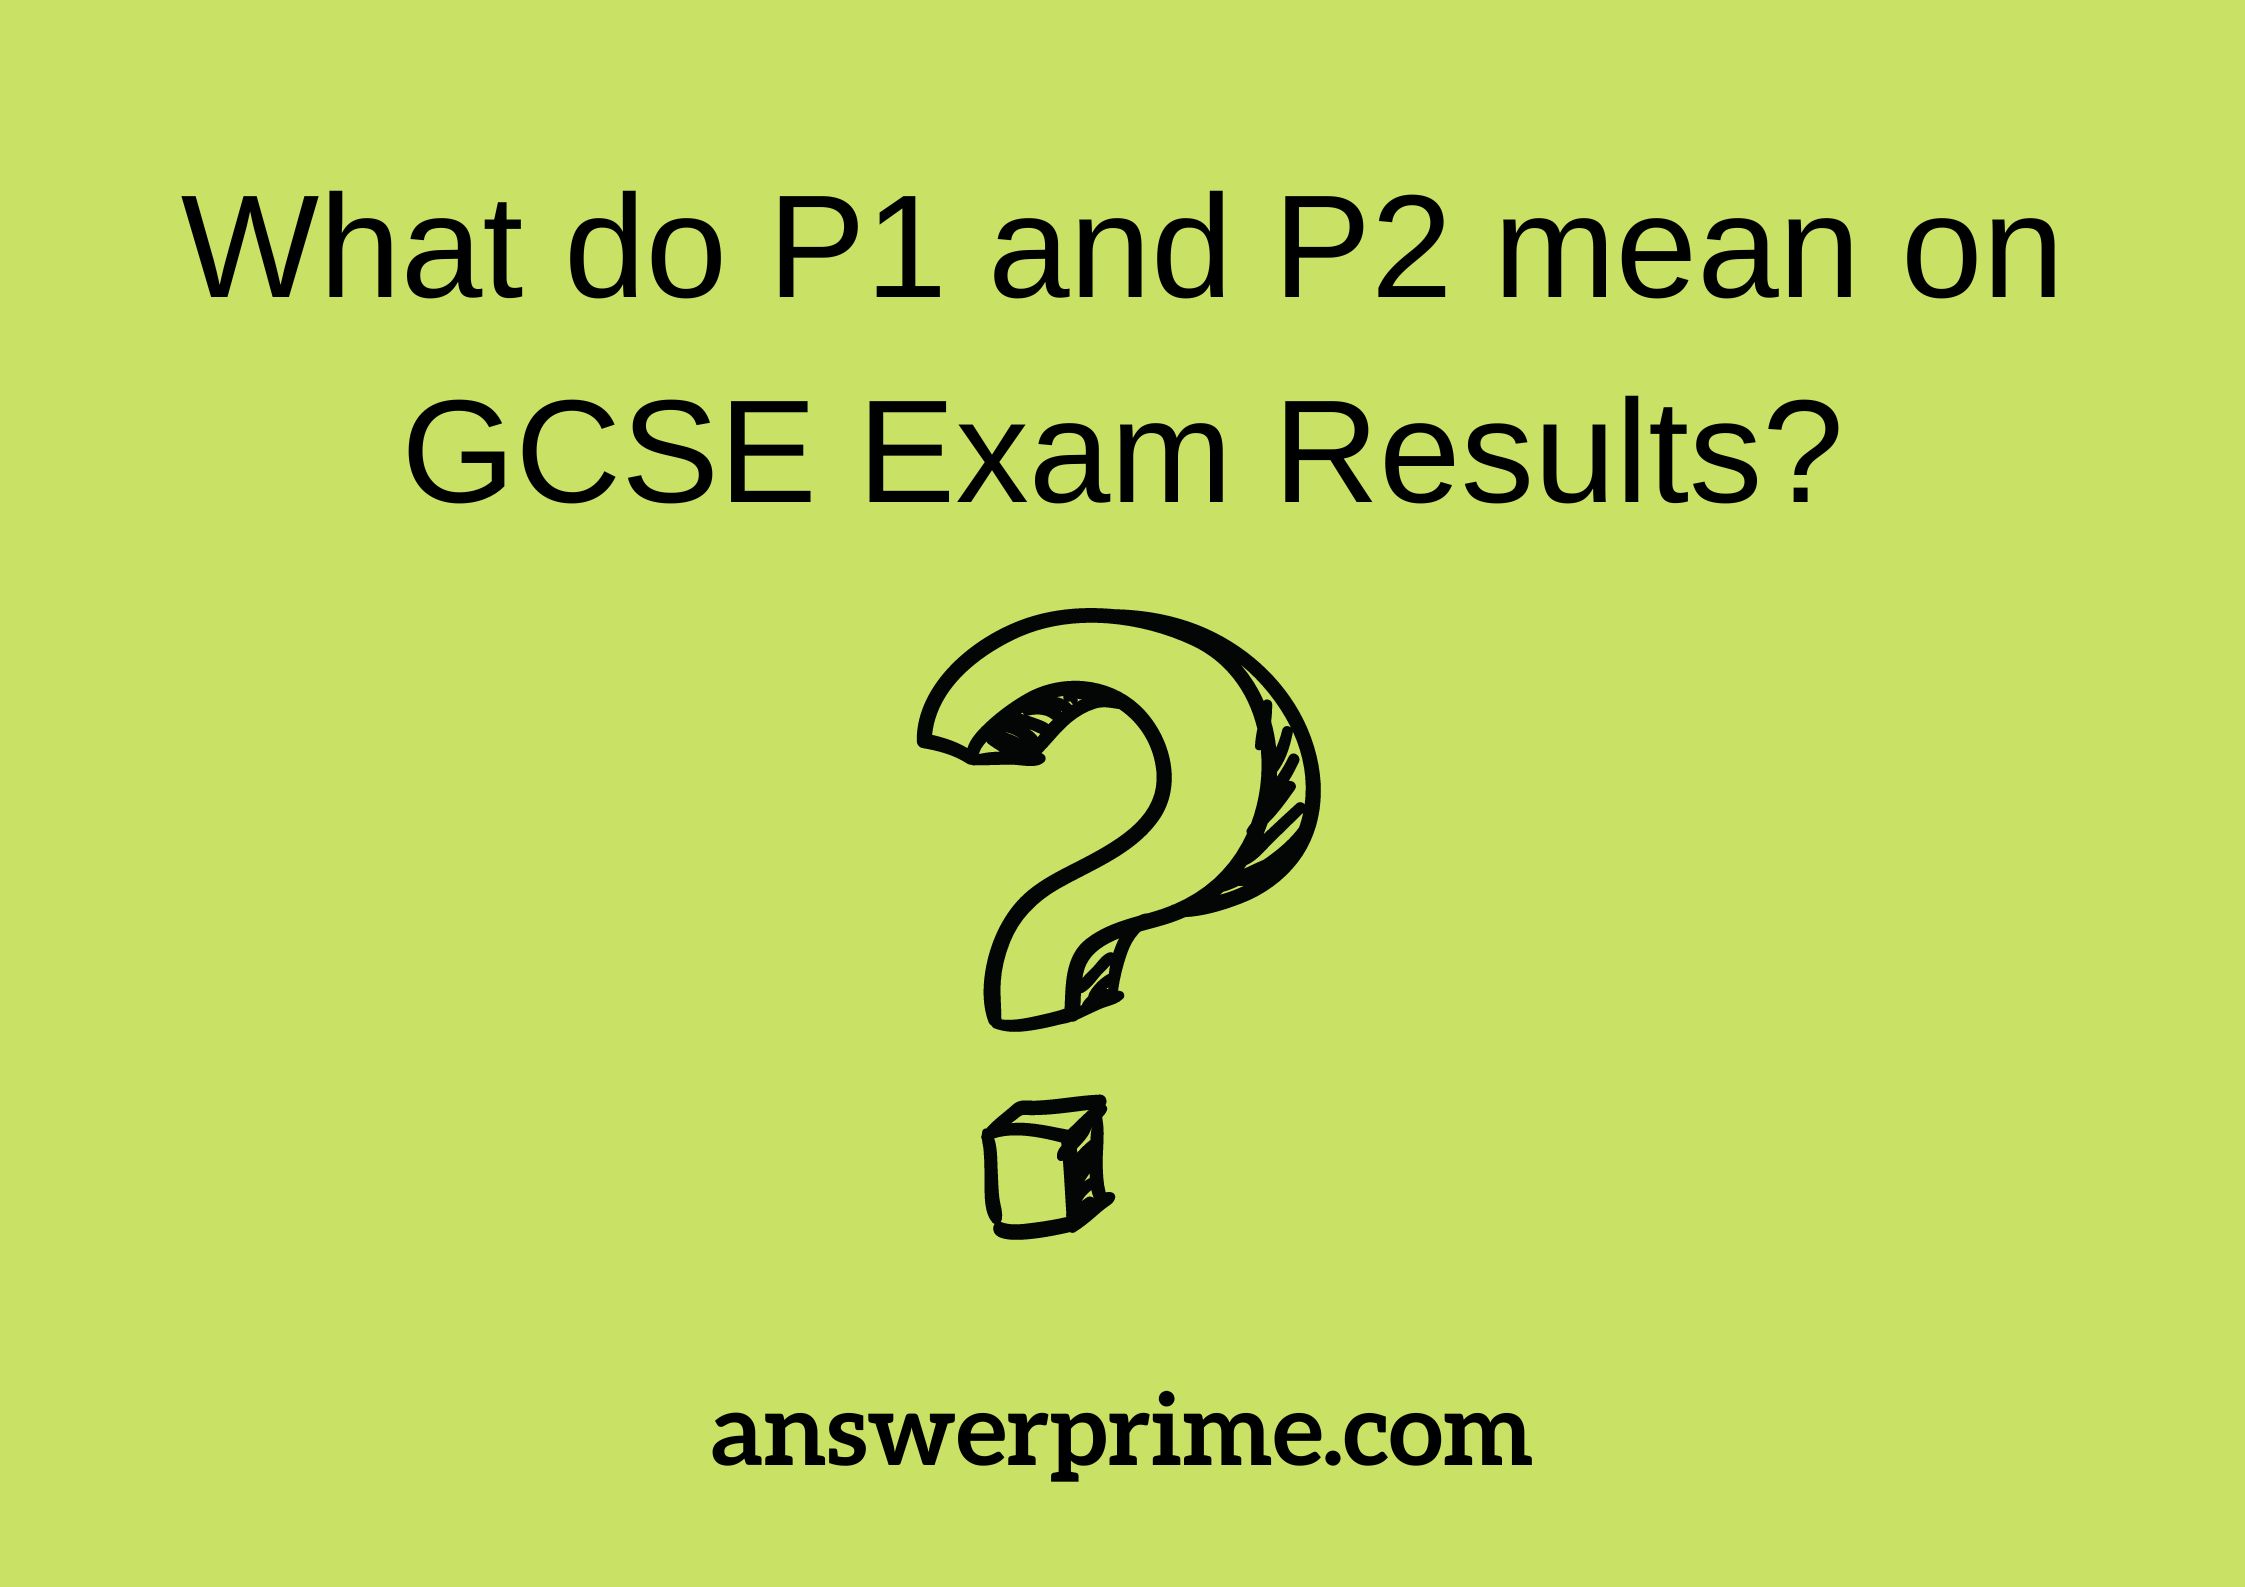 What do P1 and P2 mean on GCSE Exam Results?